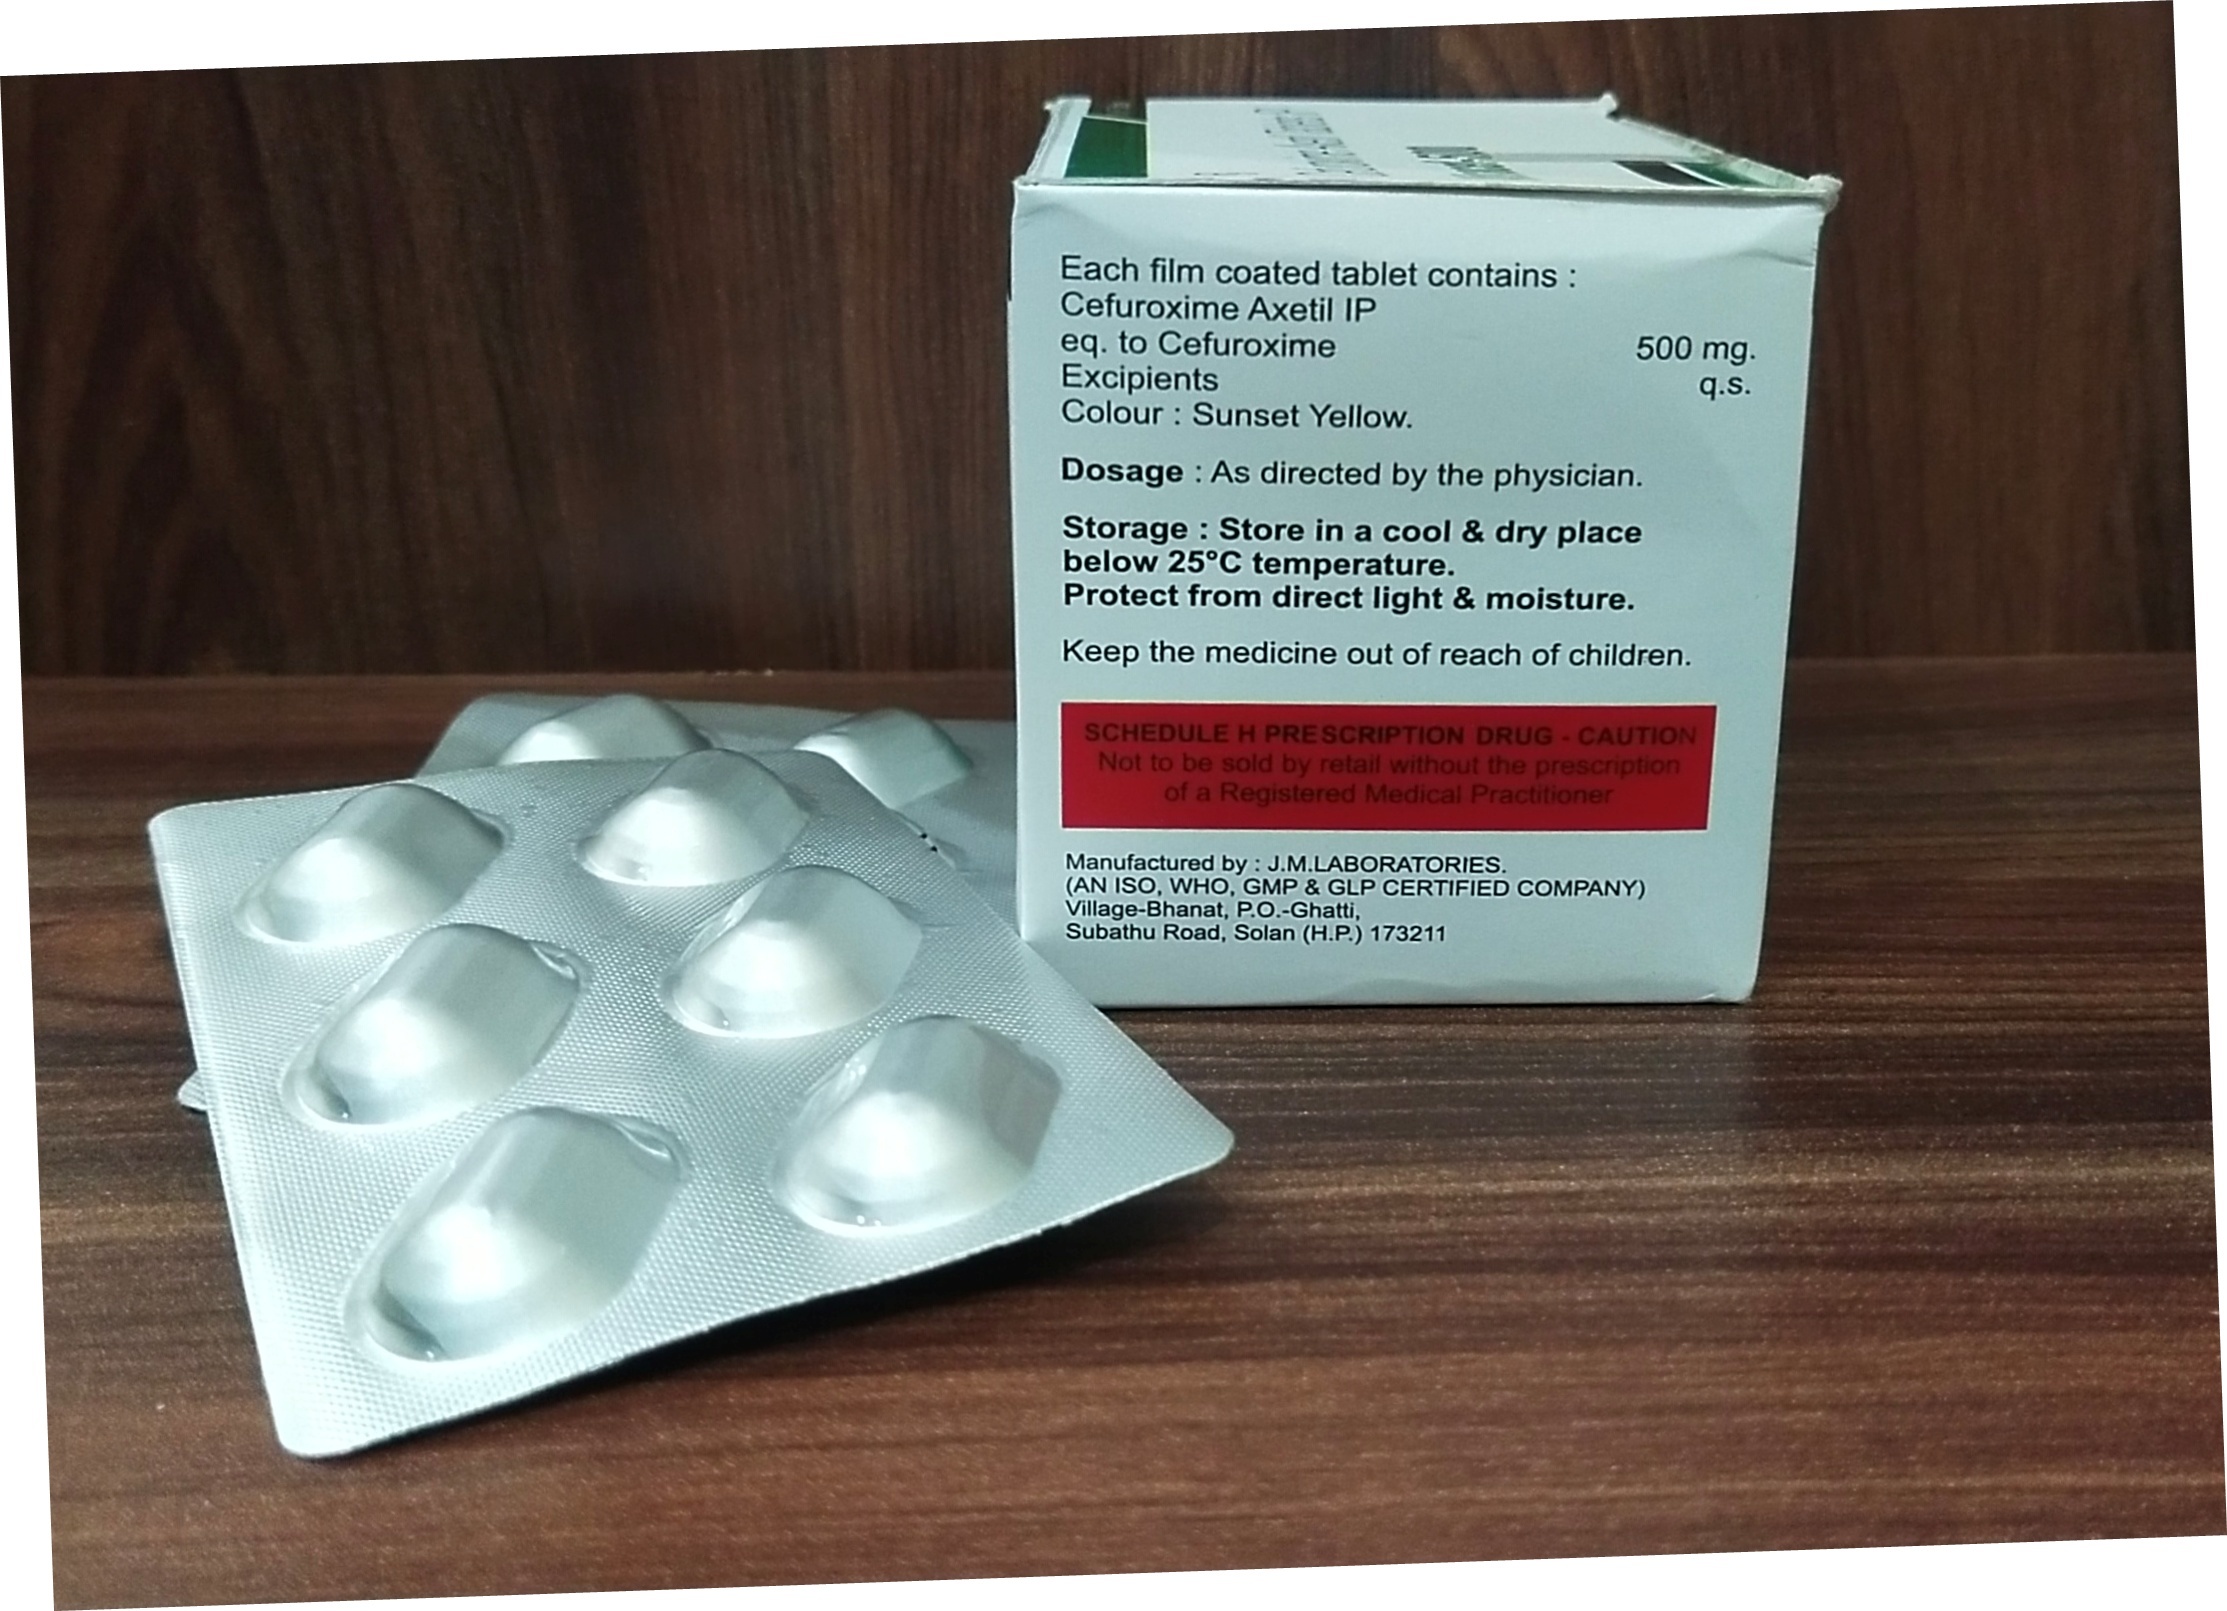 Cefuroxime Axetil Tablet in pcd phama franchise on monopoly basis